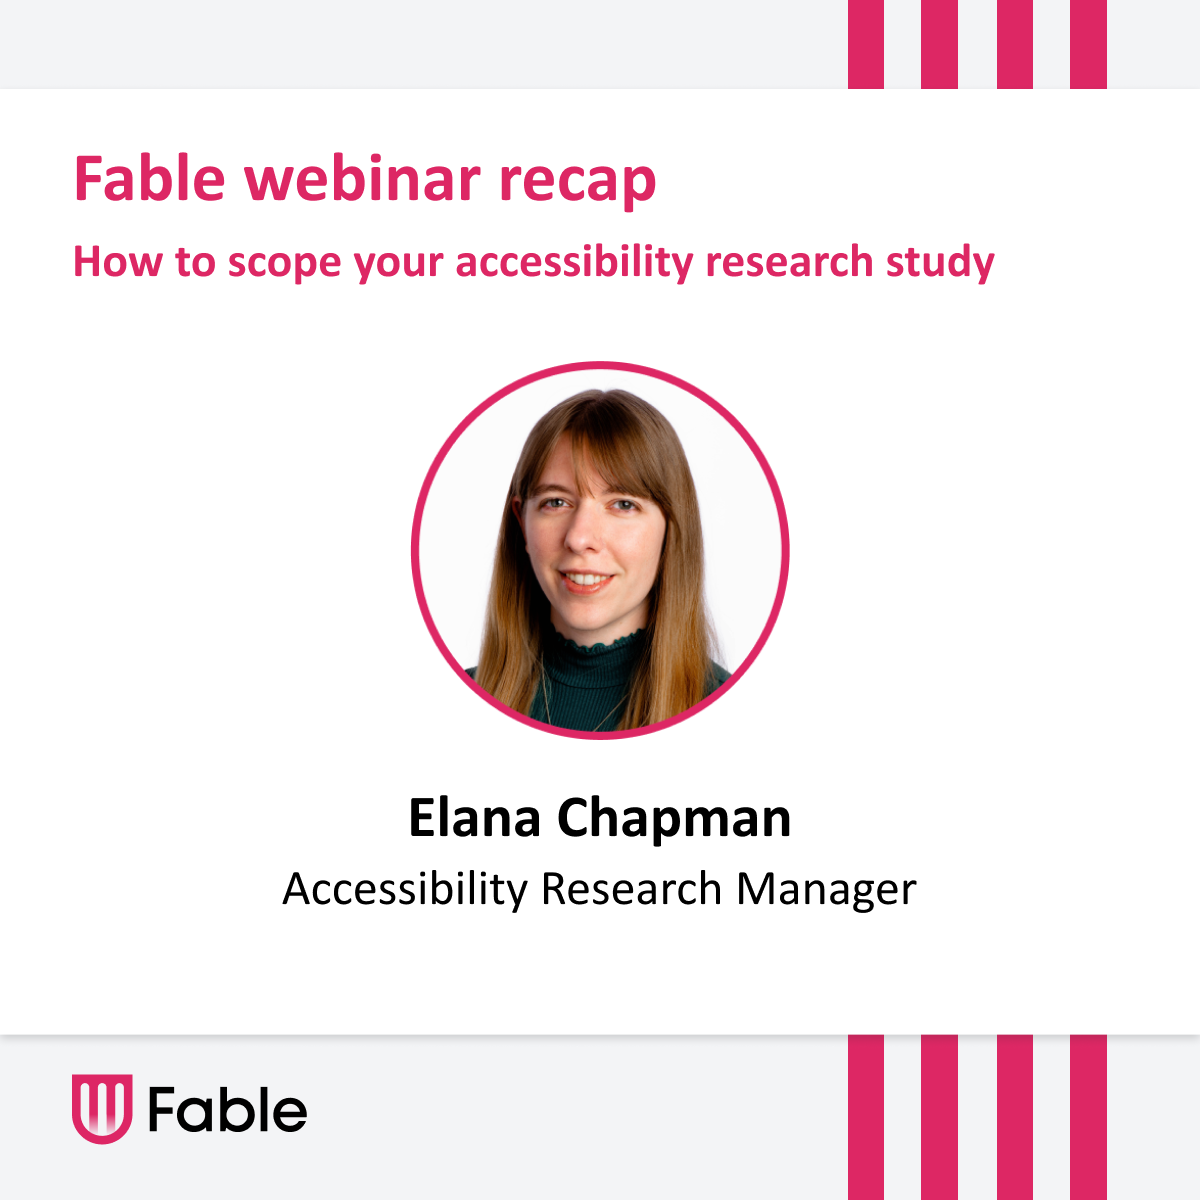 White, grey and pink thumbnail image titled "Fable webinar recap: How to scope your accessibility study" with a headshot of Elana Chapman, Accessibility Research Manager at Fable.